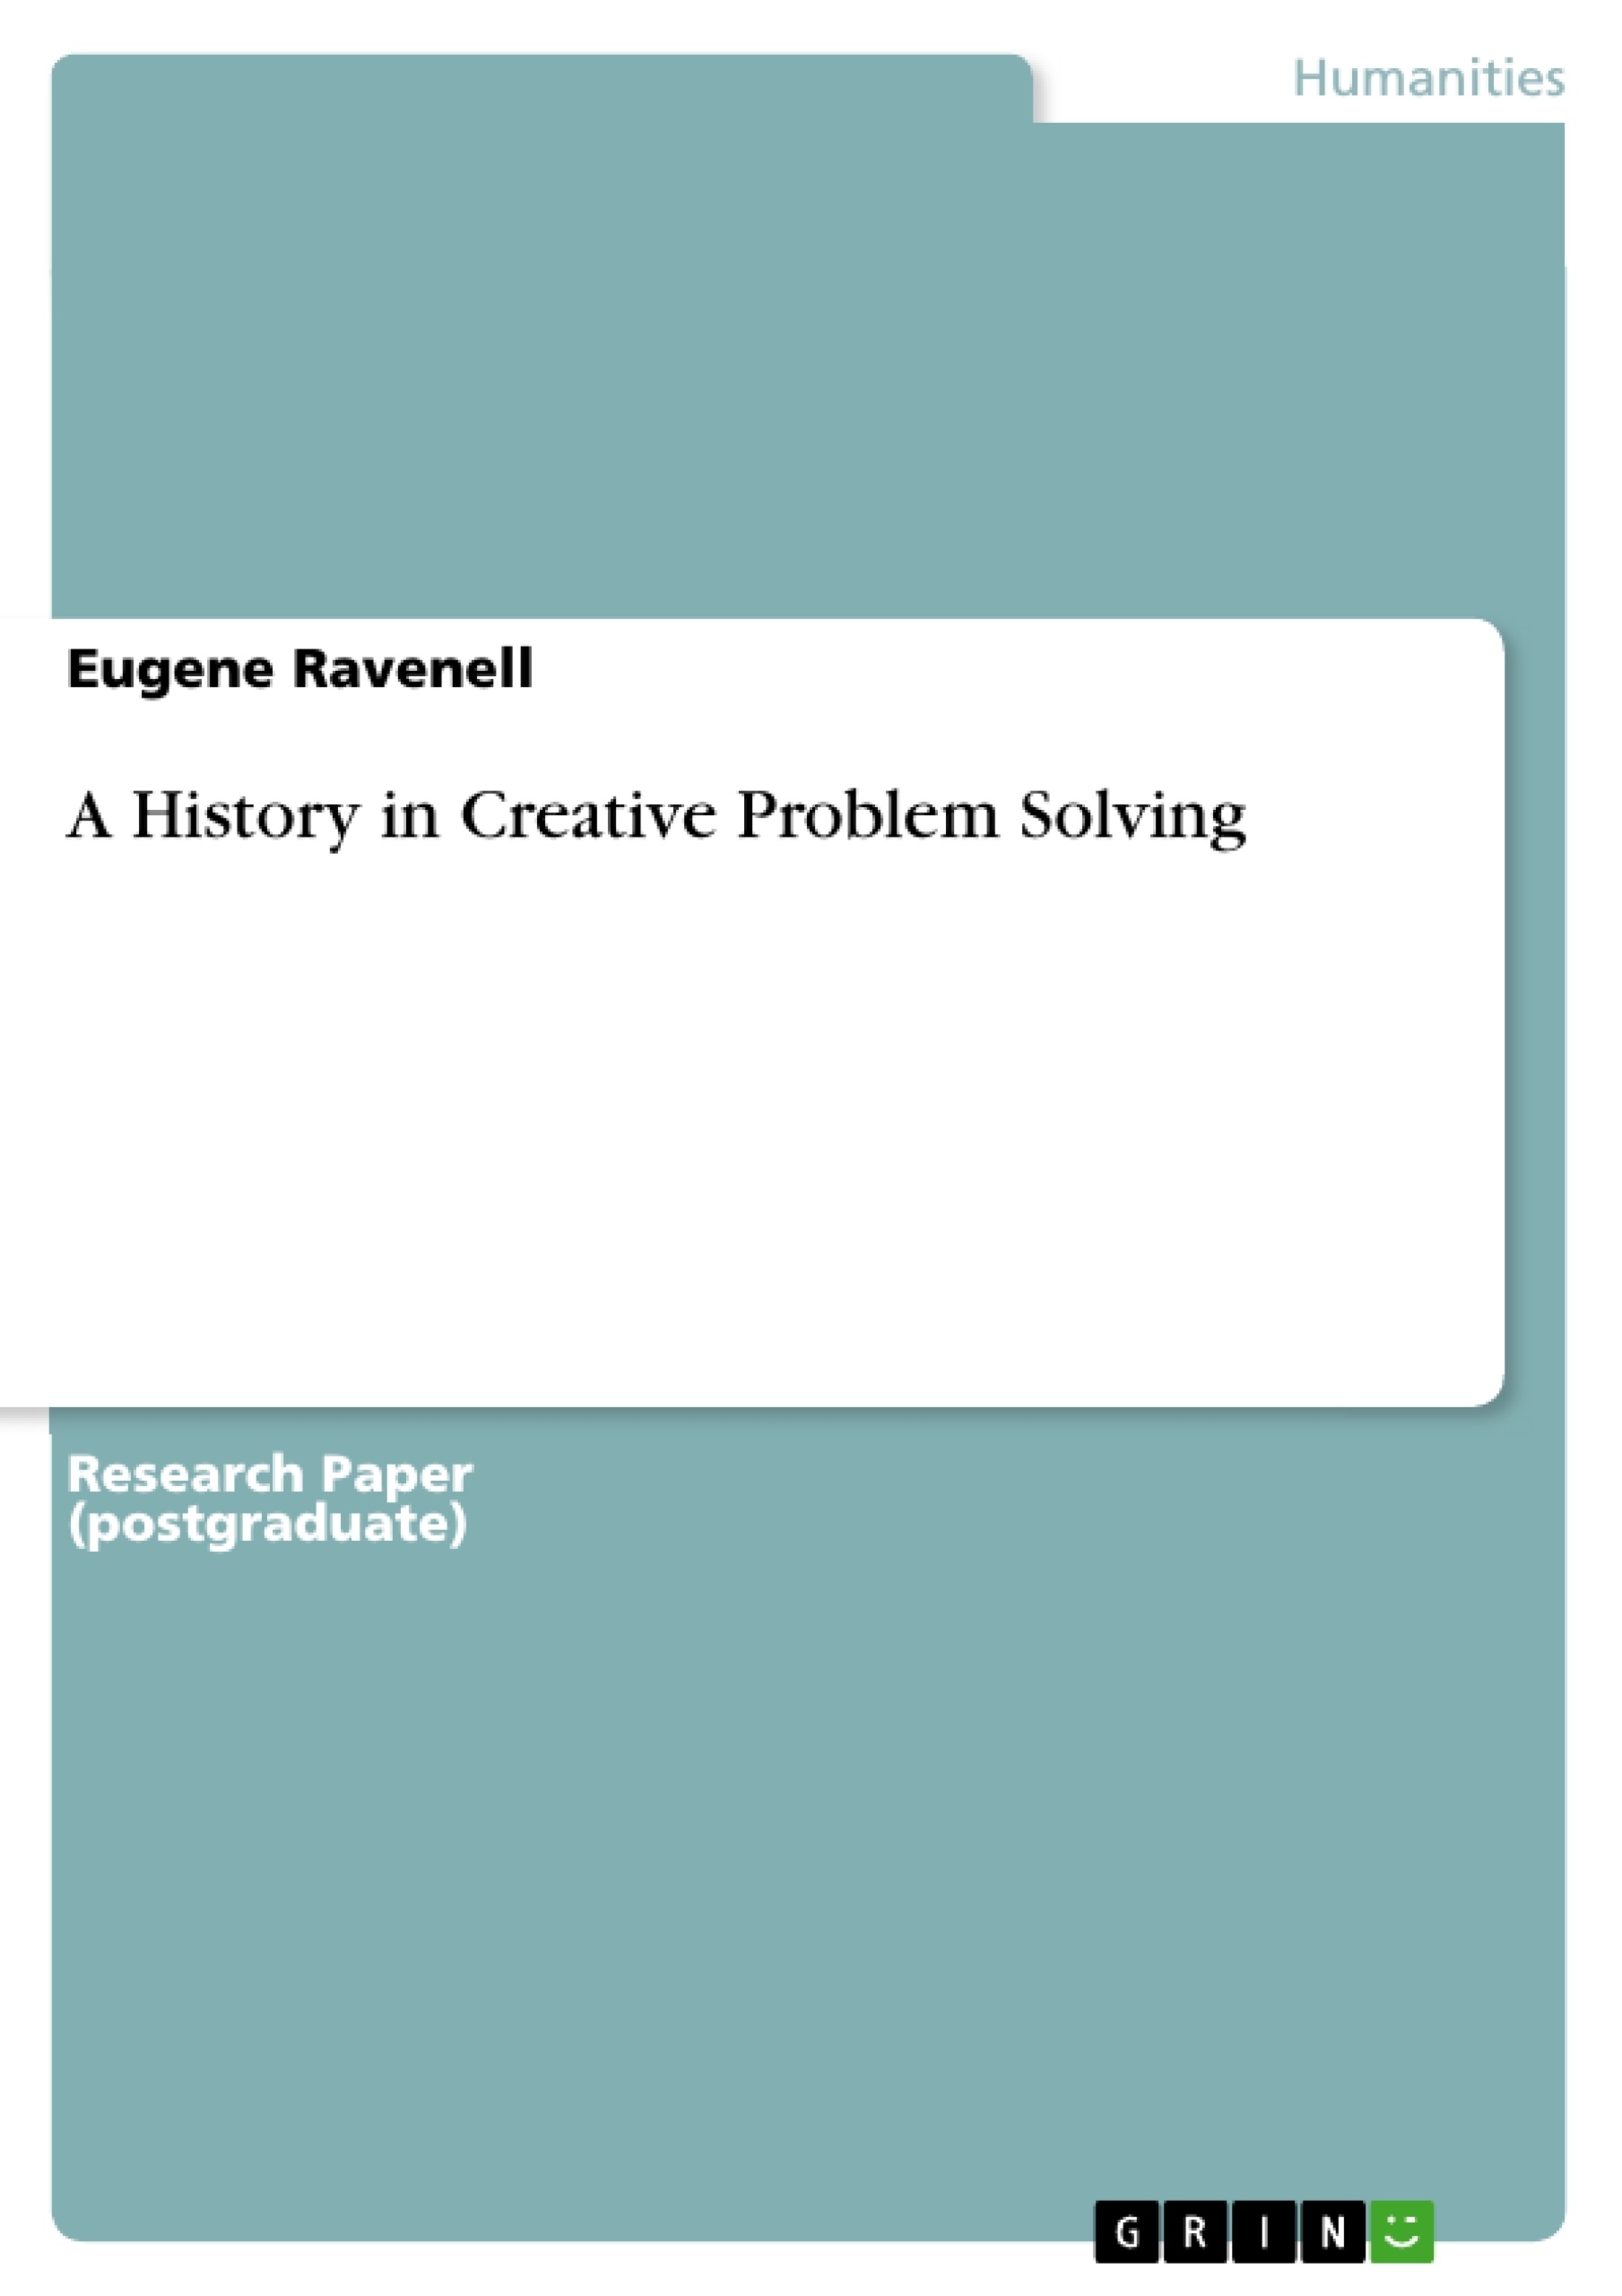 Title: A History in Creative Problem Solving